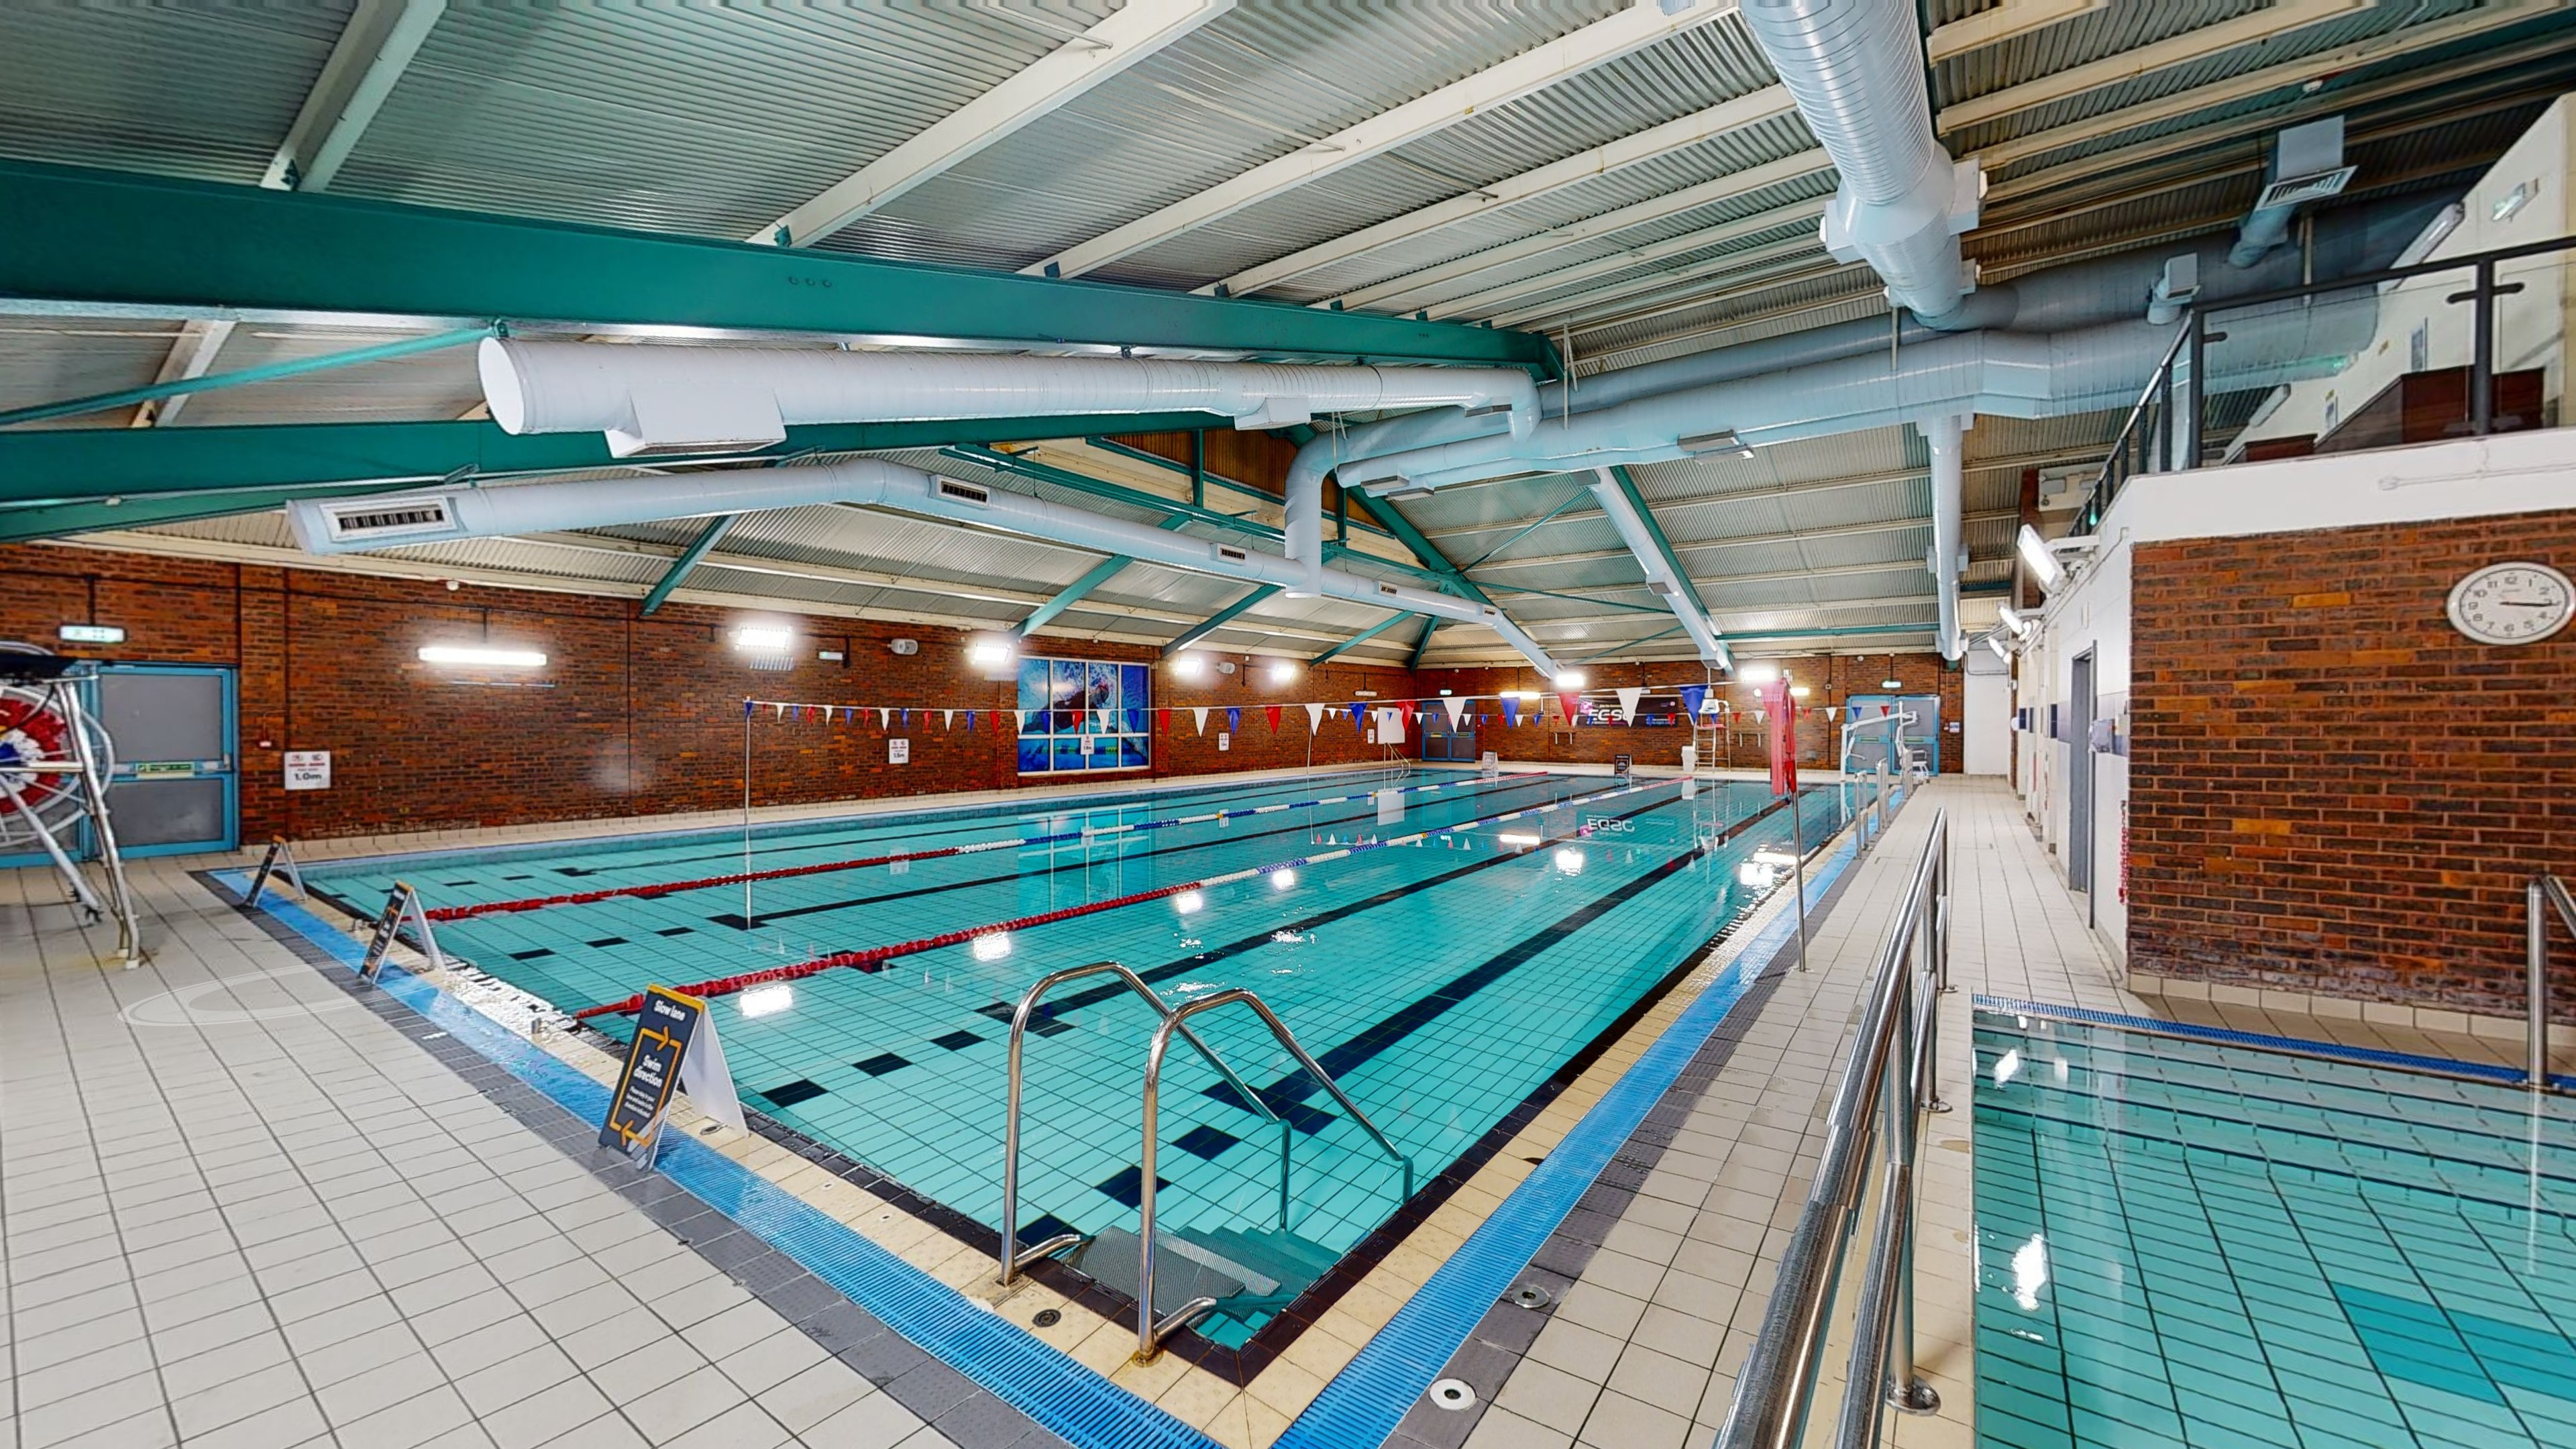 Swimming pool at Kings Centre Kings Centre East Grinstead 01342 328616